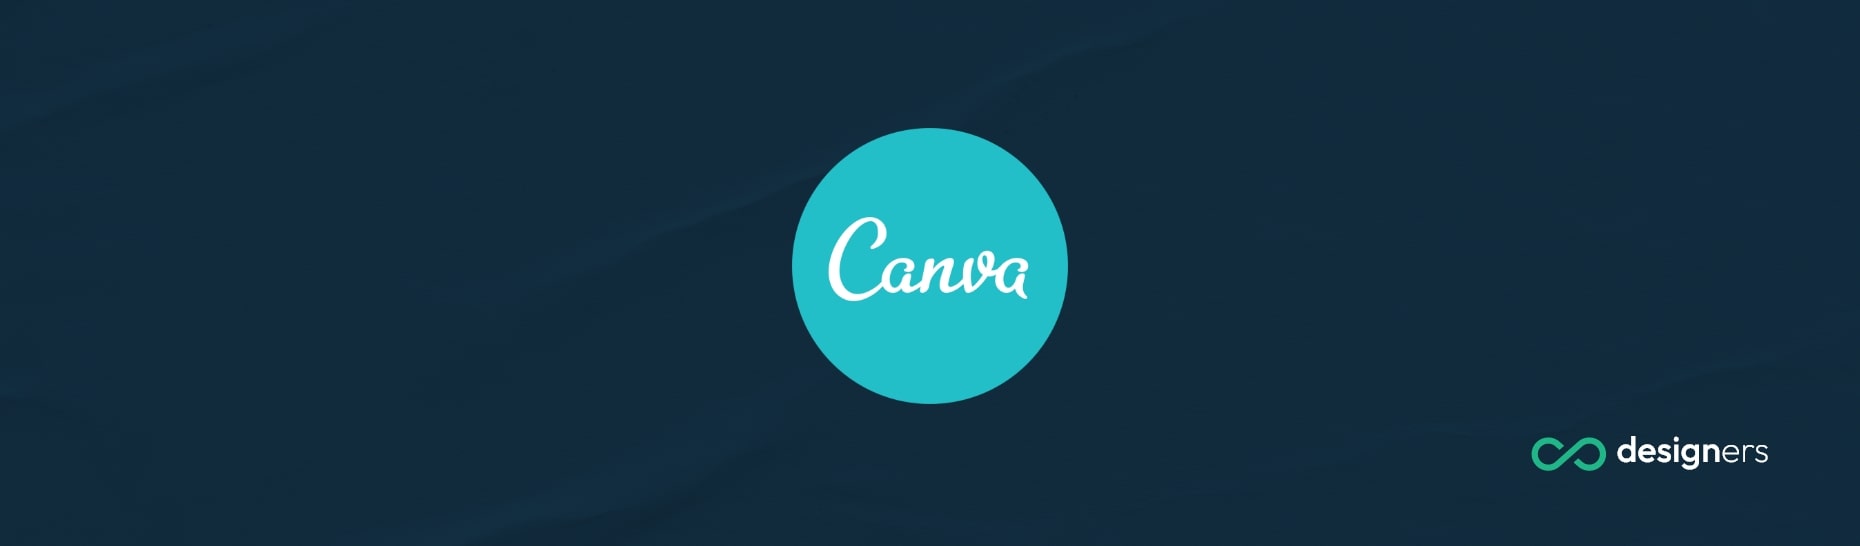 What to Do if Canva Is Not Working?